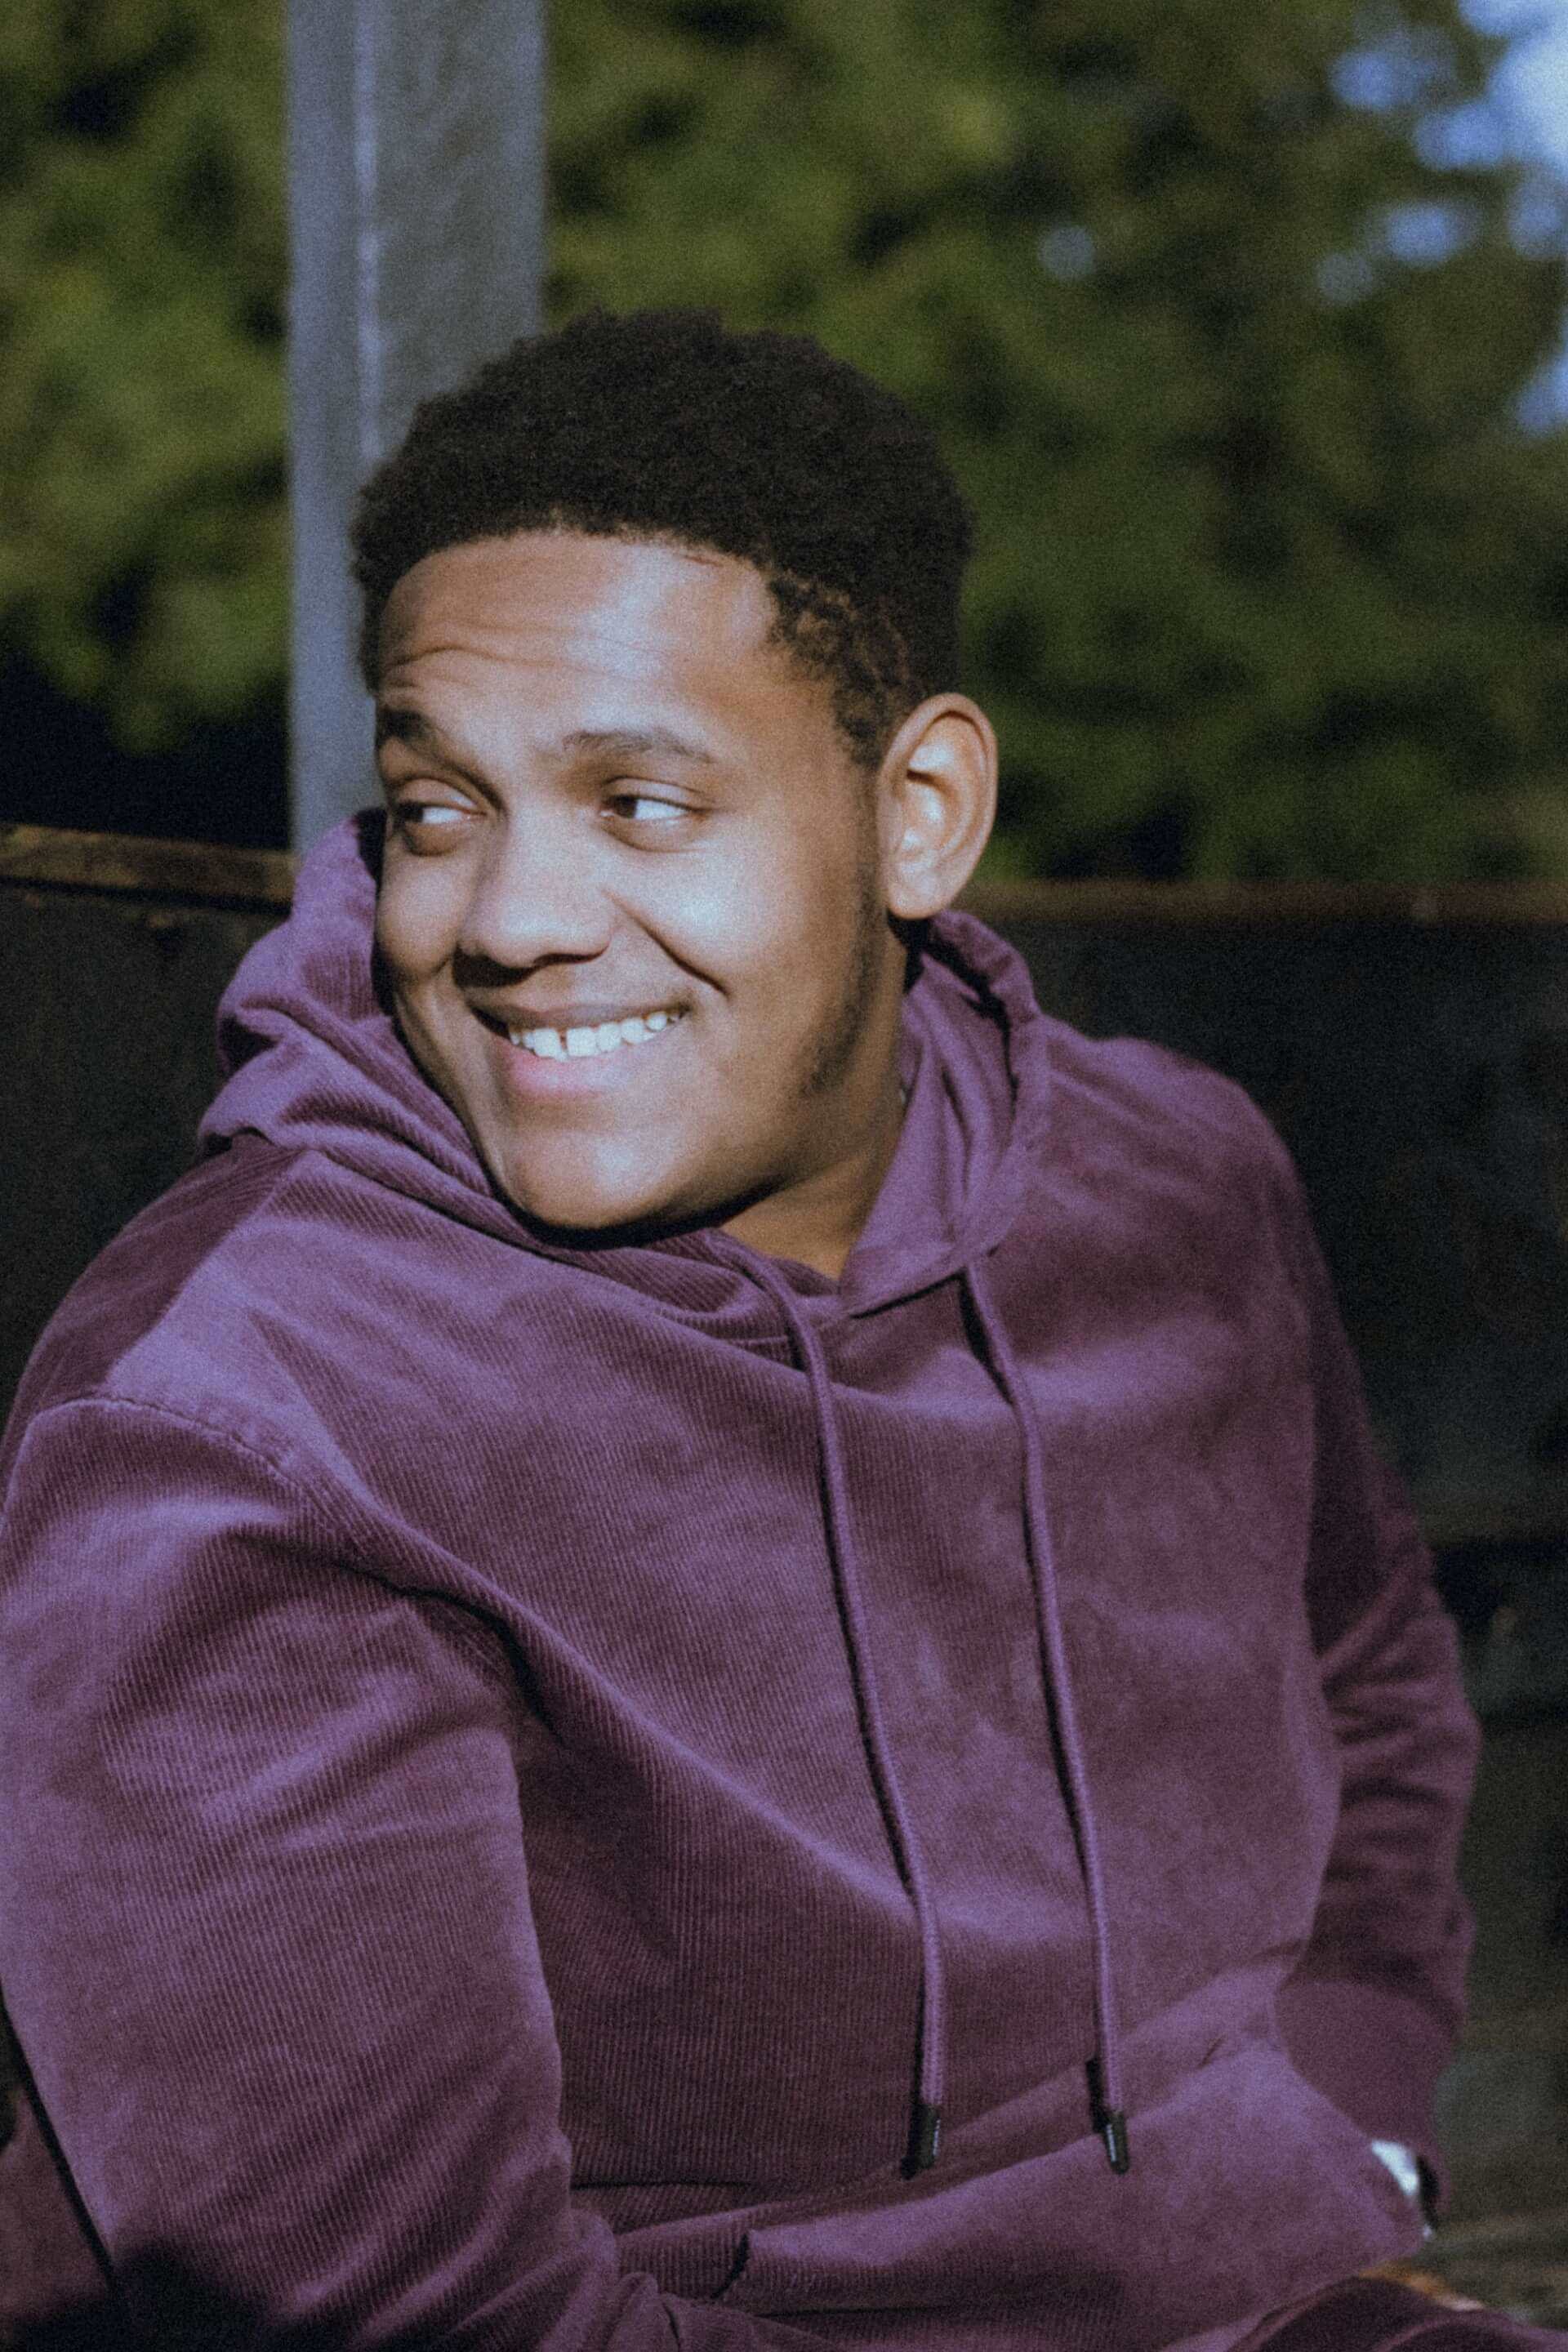 Josiah sitting in a park wearing a purple hoodie. He is looking over his right shoulder and smiling.